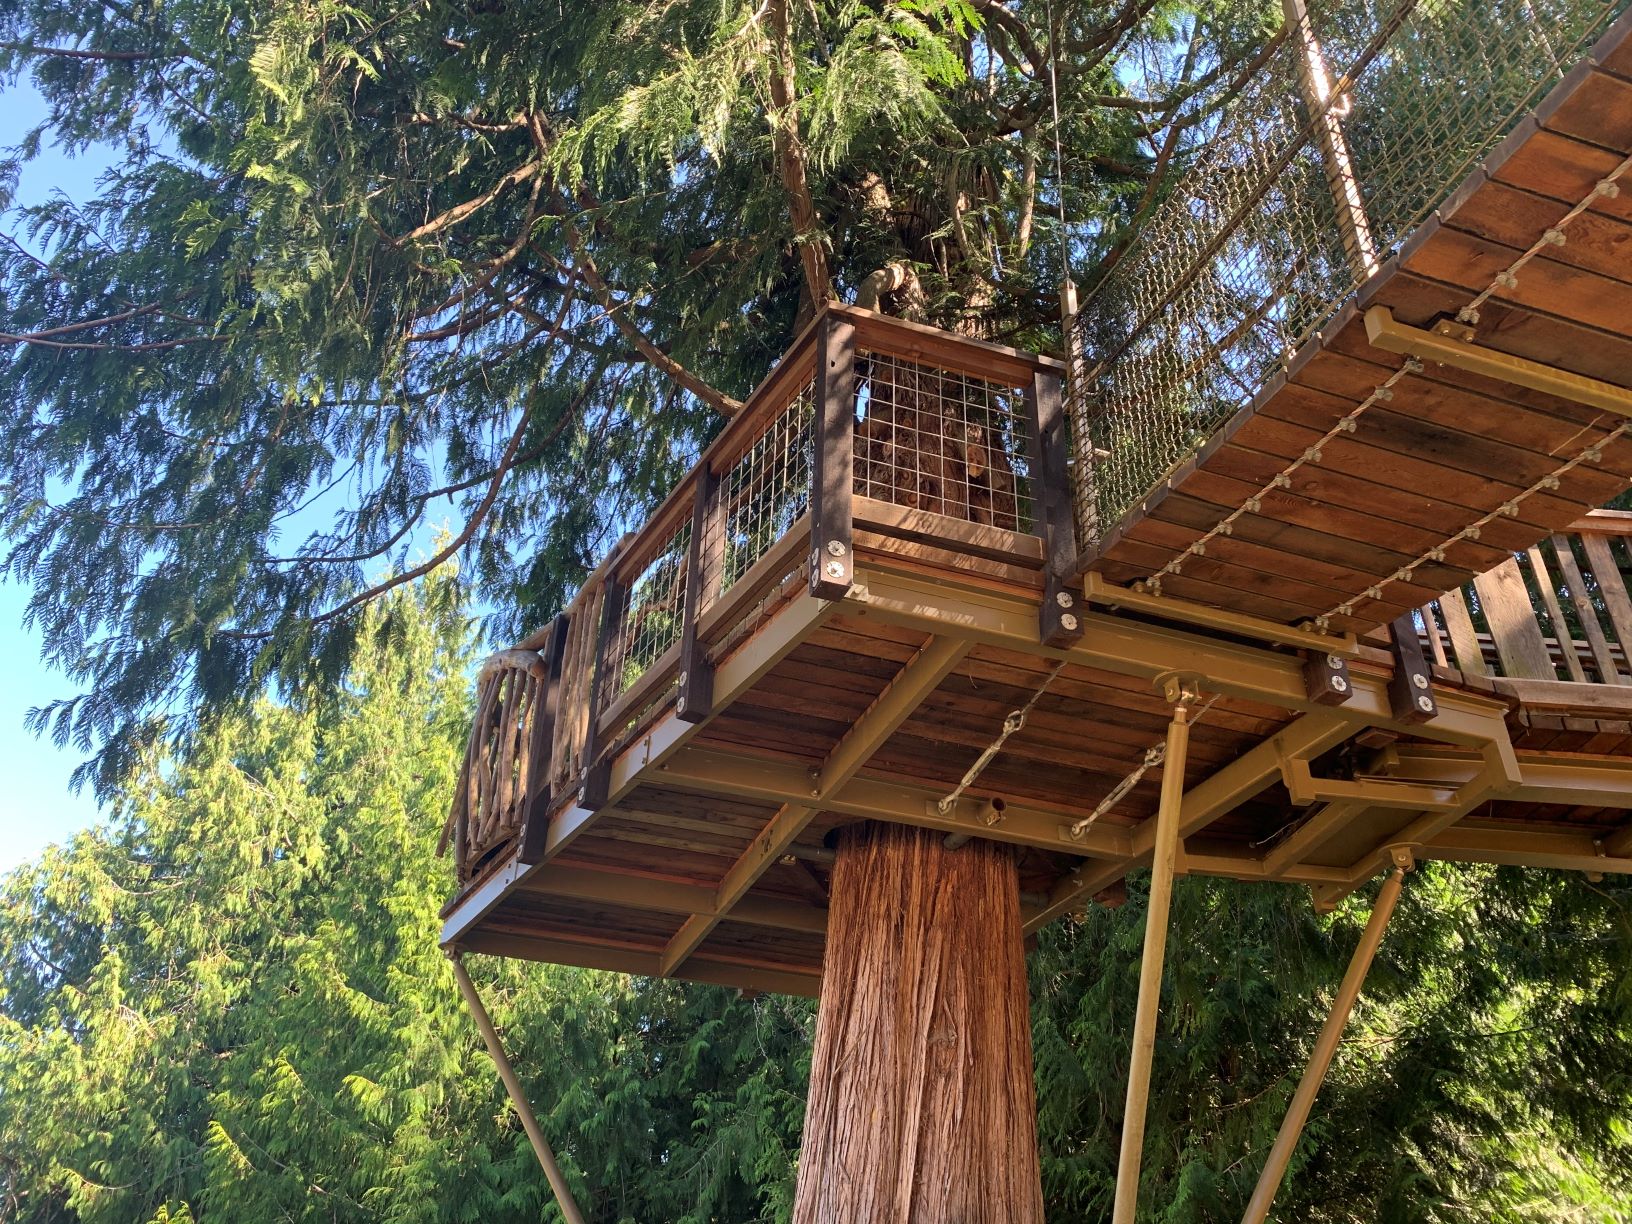 The treehouse at Big Rock Park, with a platform built around a tall cedar and access bridges to the platform